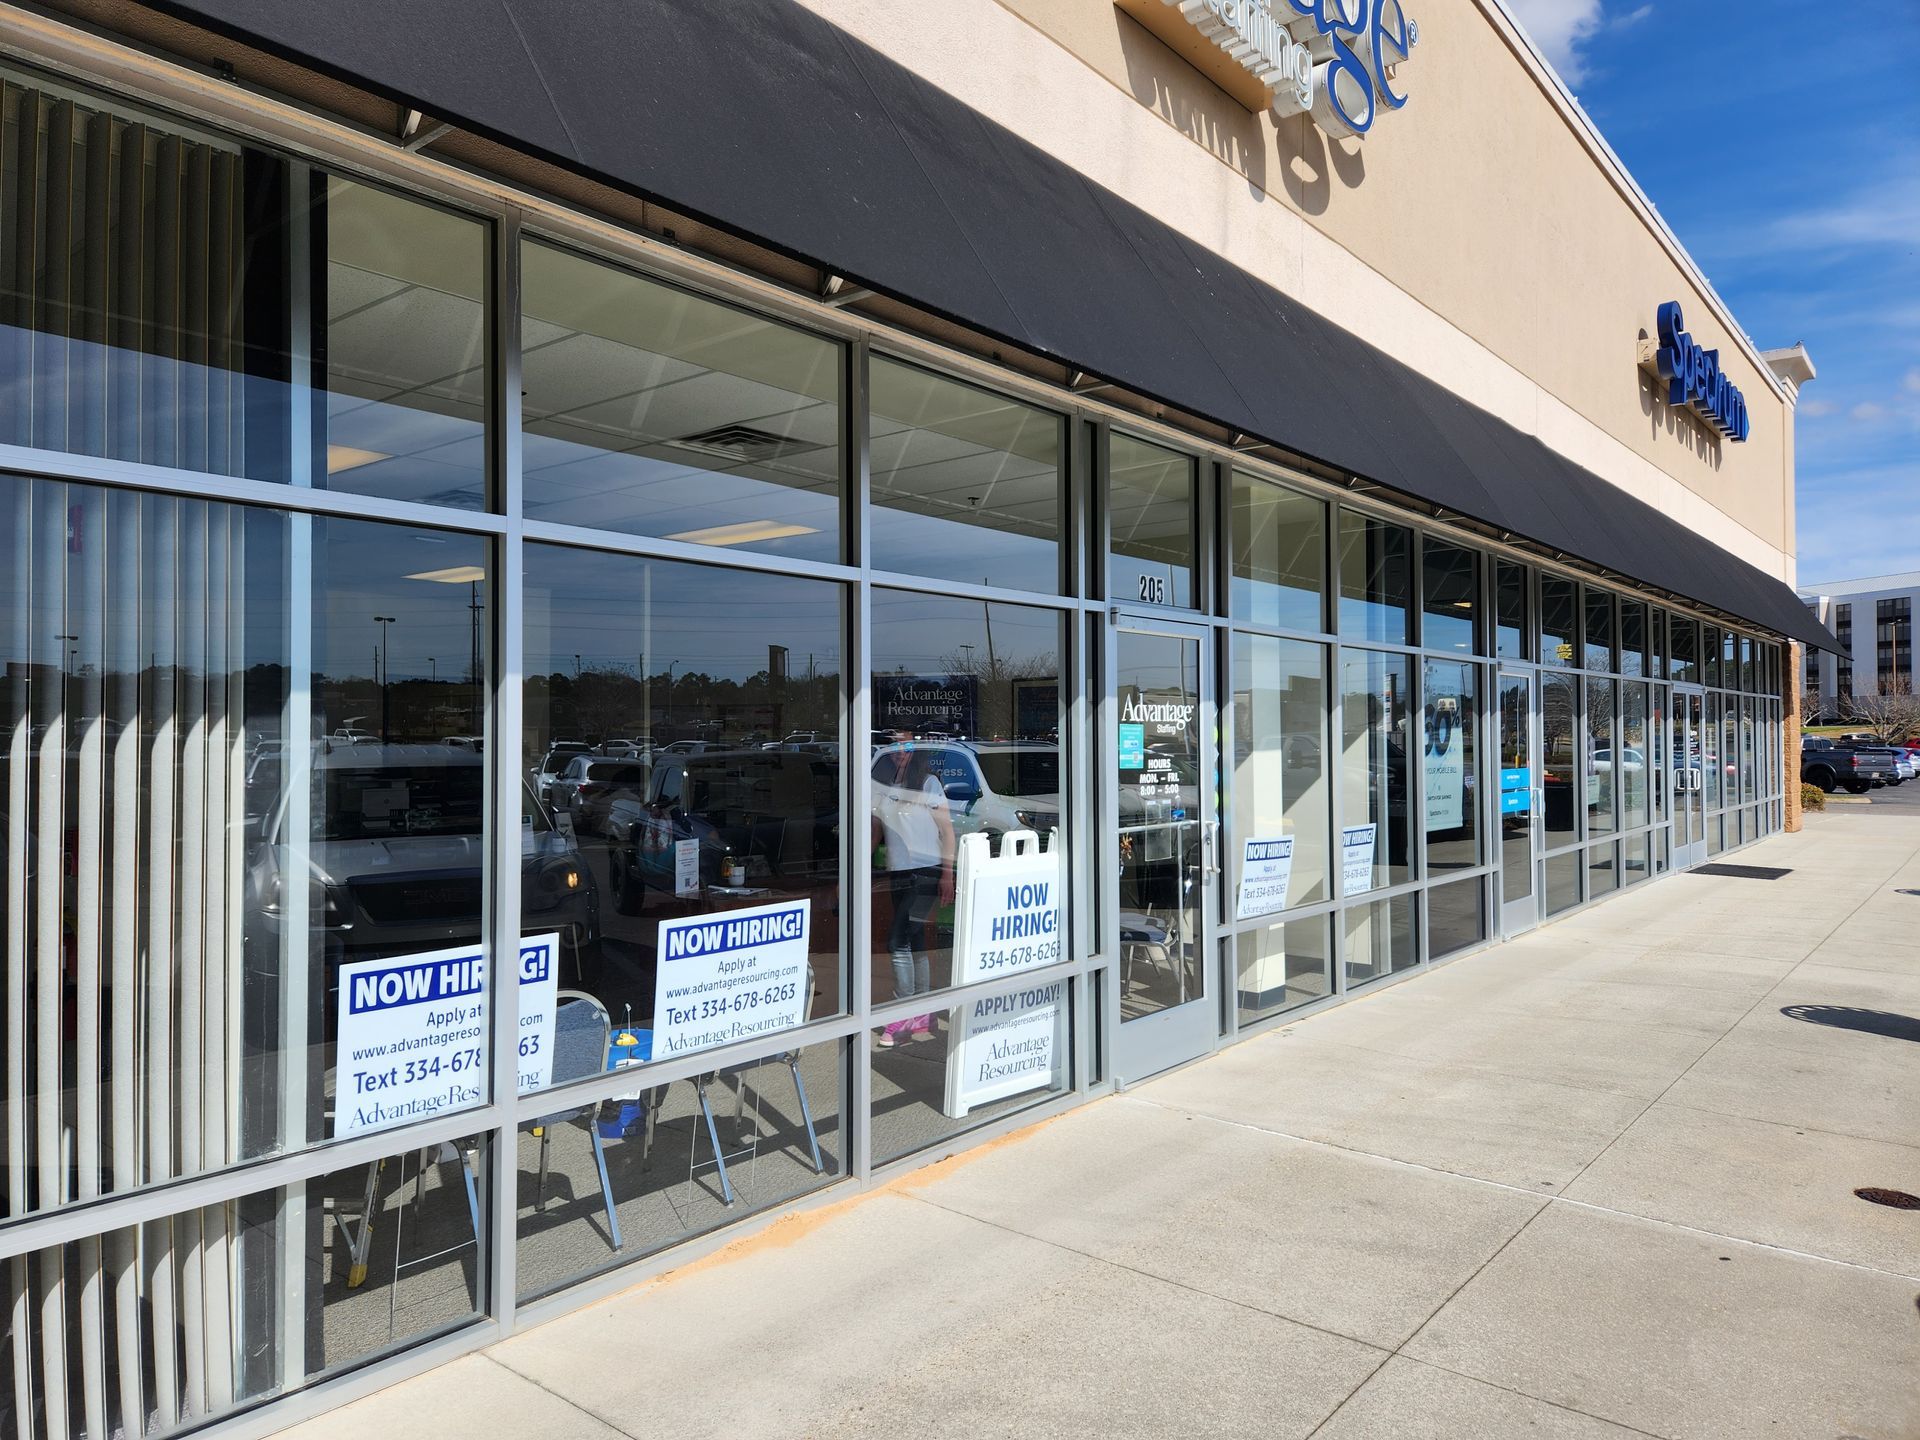 Storefront tinting - top-efficiency gained producing maximum energy savings and comfort inside the windows in Alabama